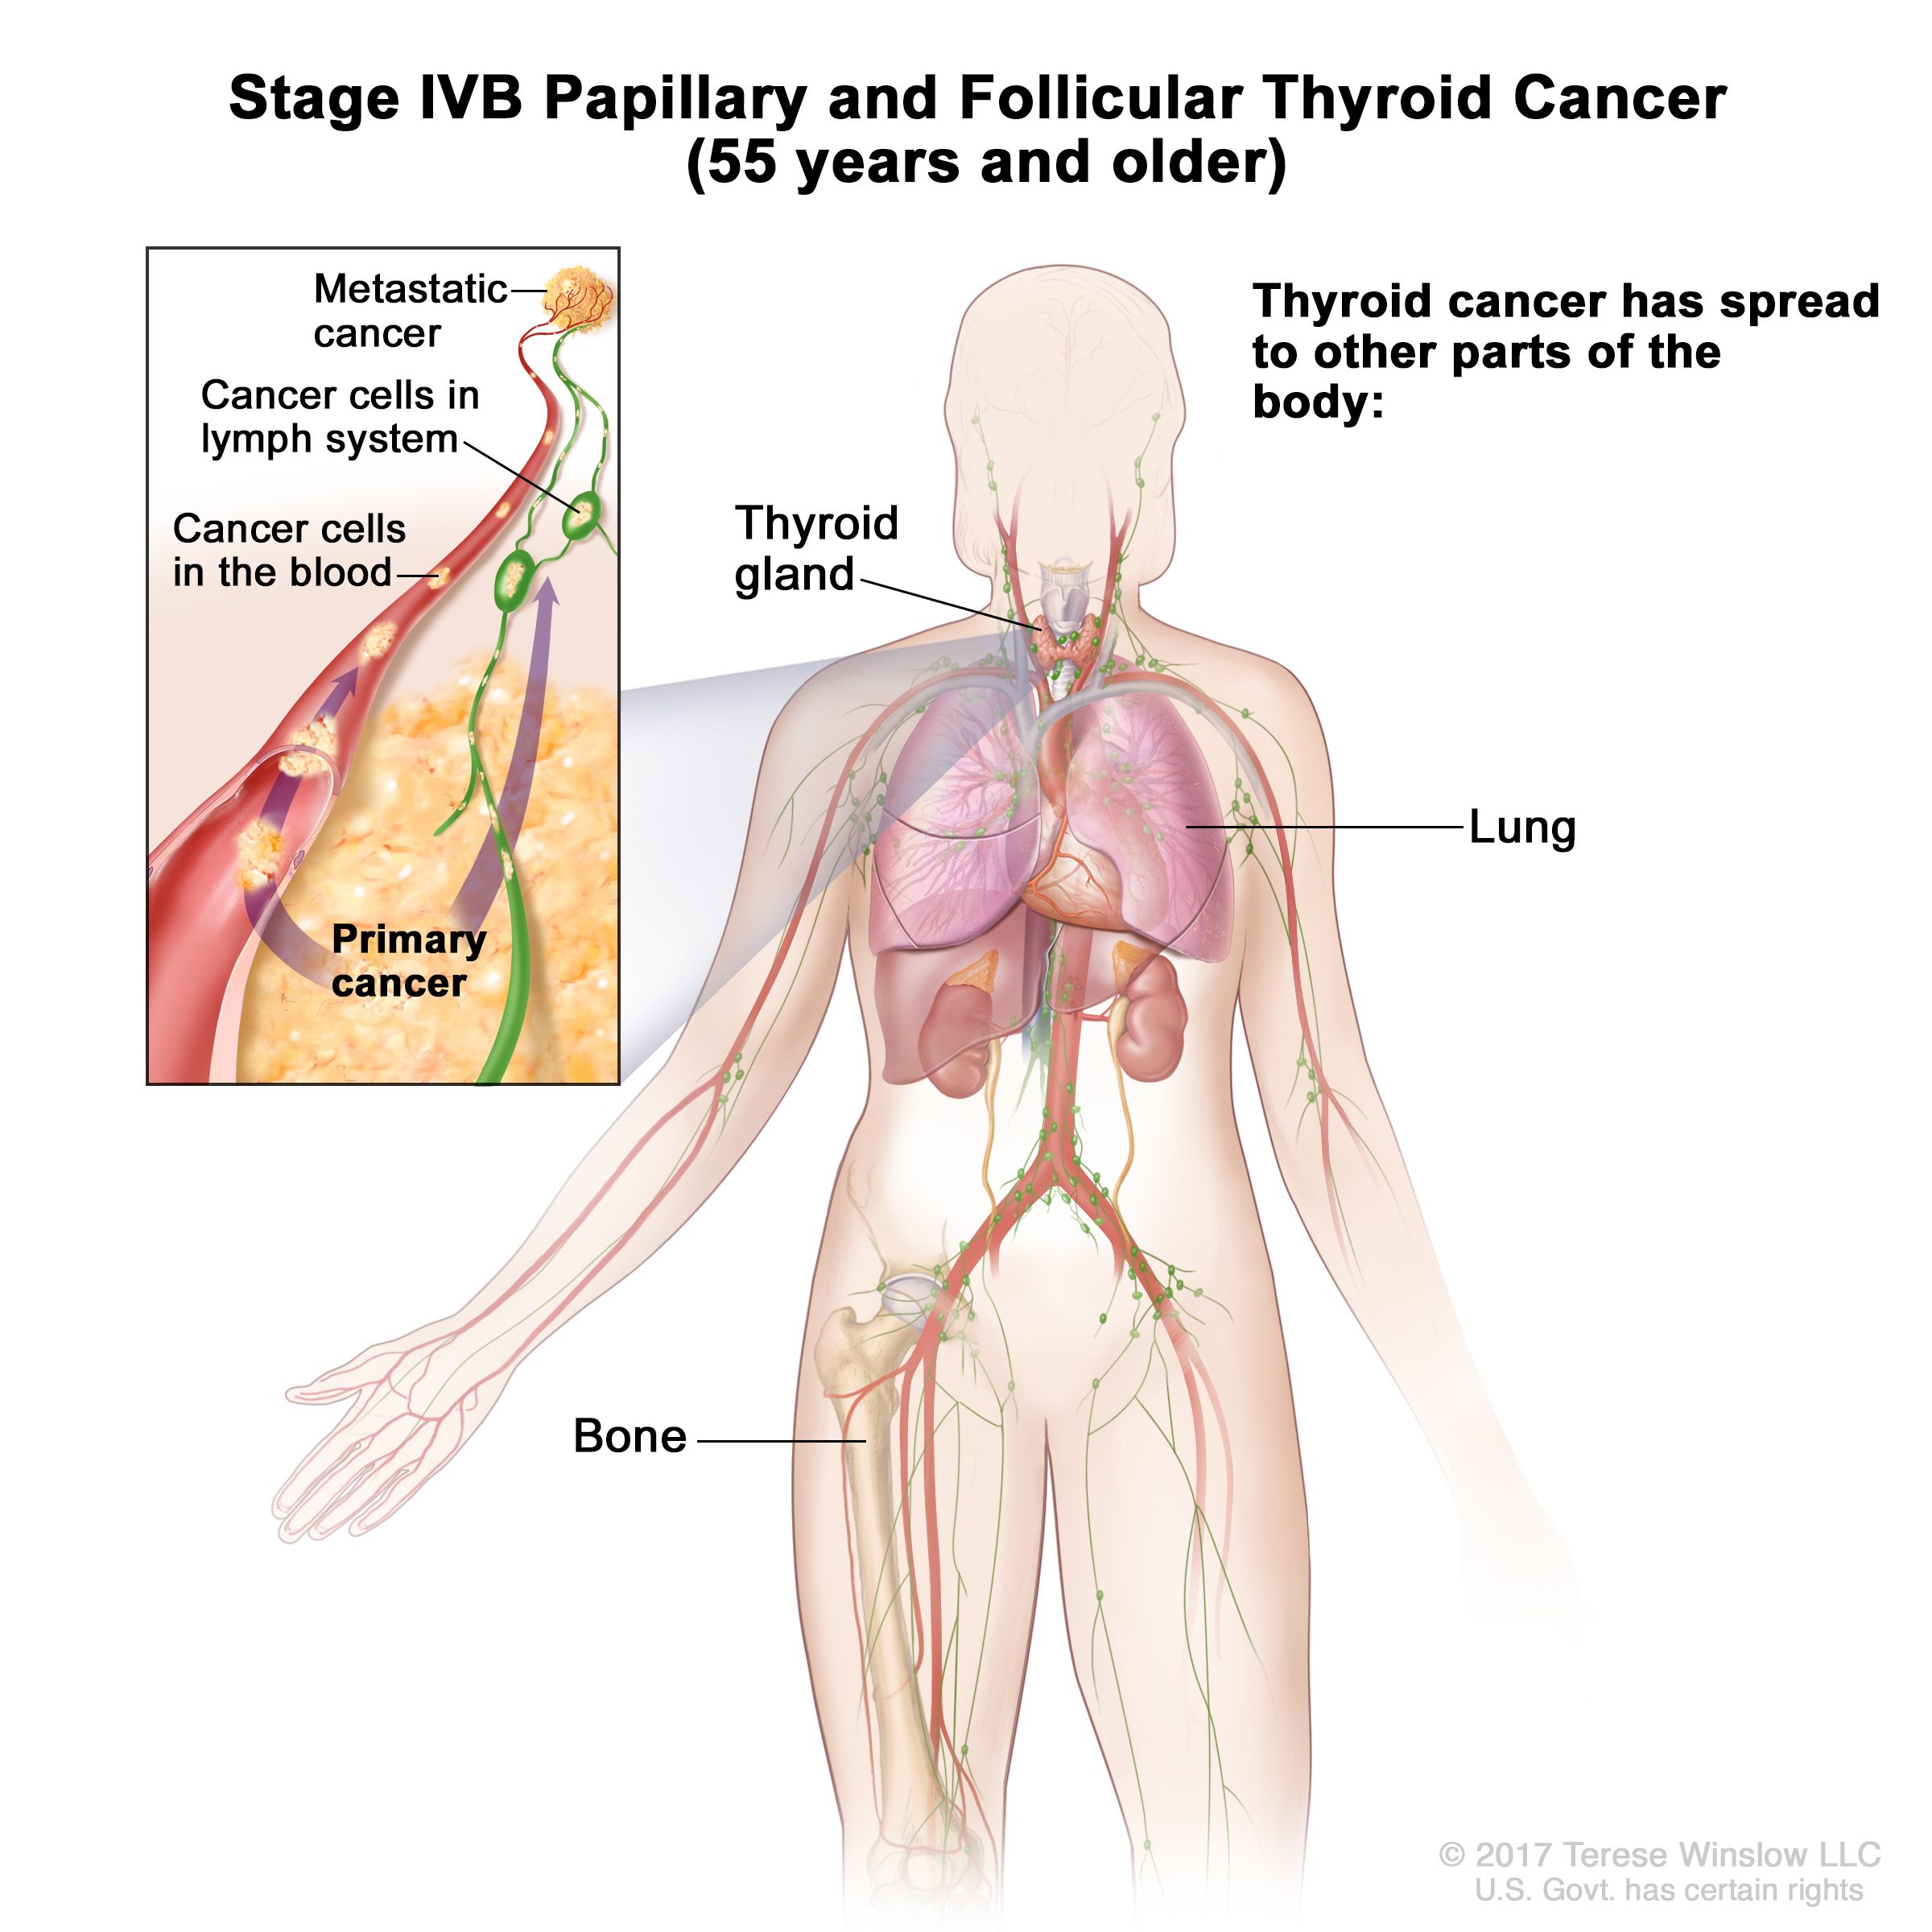 Does Papillary Thyroid Cancer Spread To Lungs